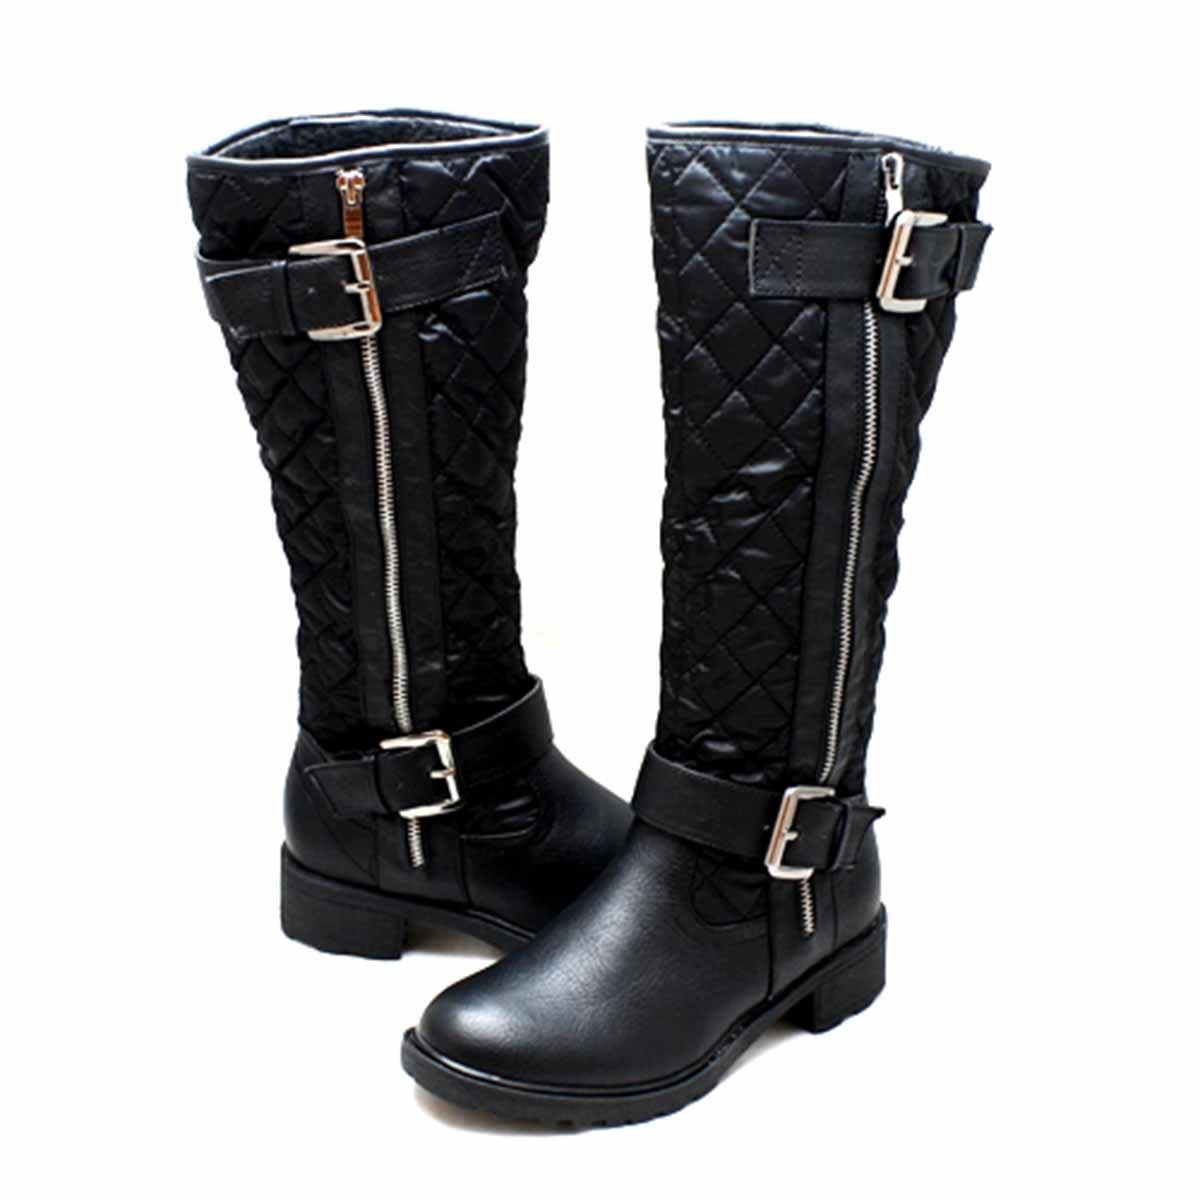 Quilted flat rain boots with silver buckles + warm lining